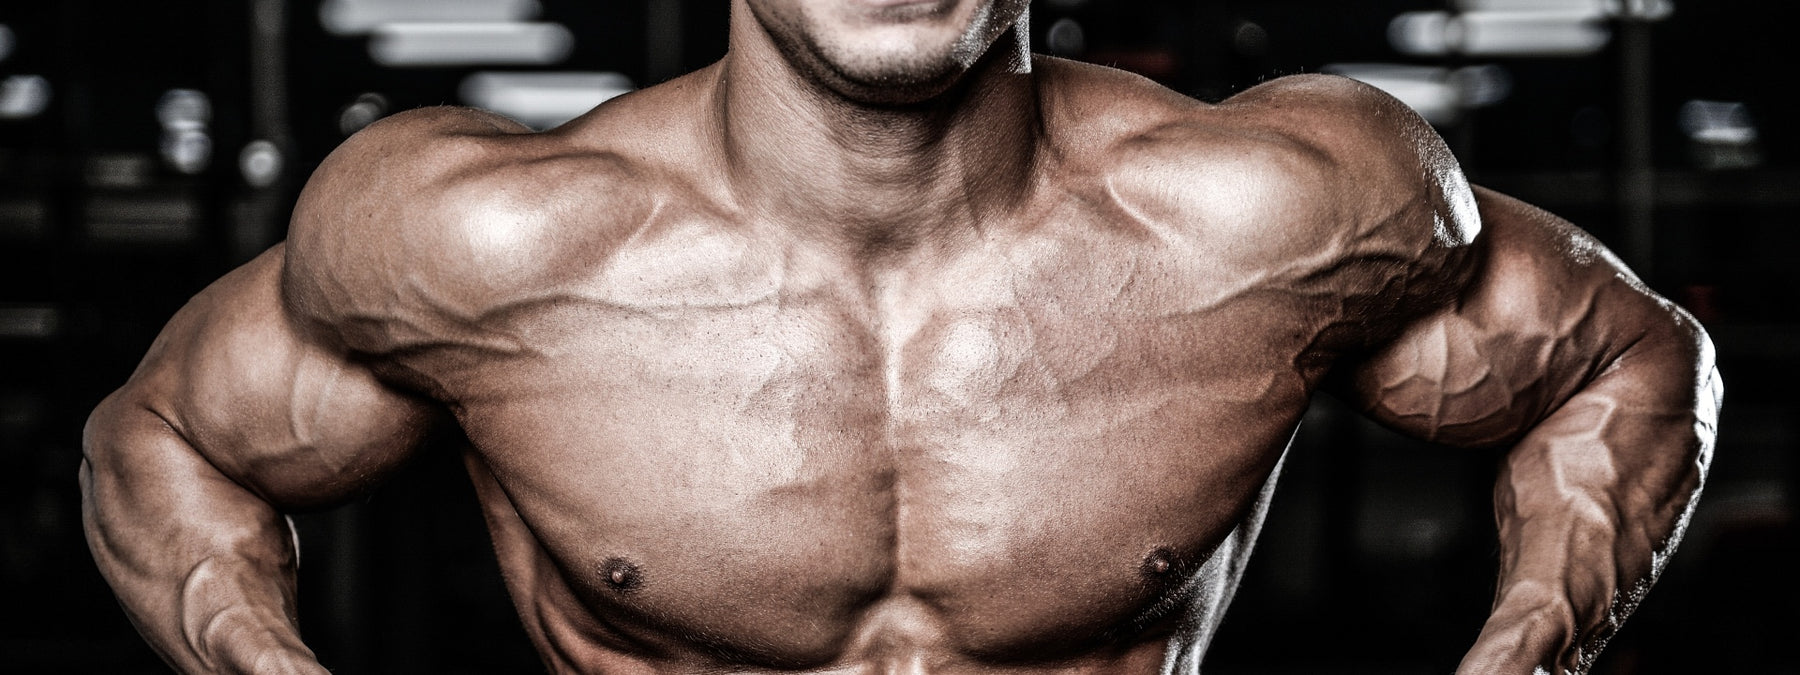 Block Training - Brief & Brutal Muscle Building Workouts